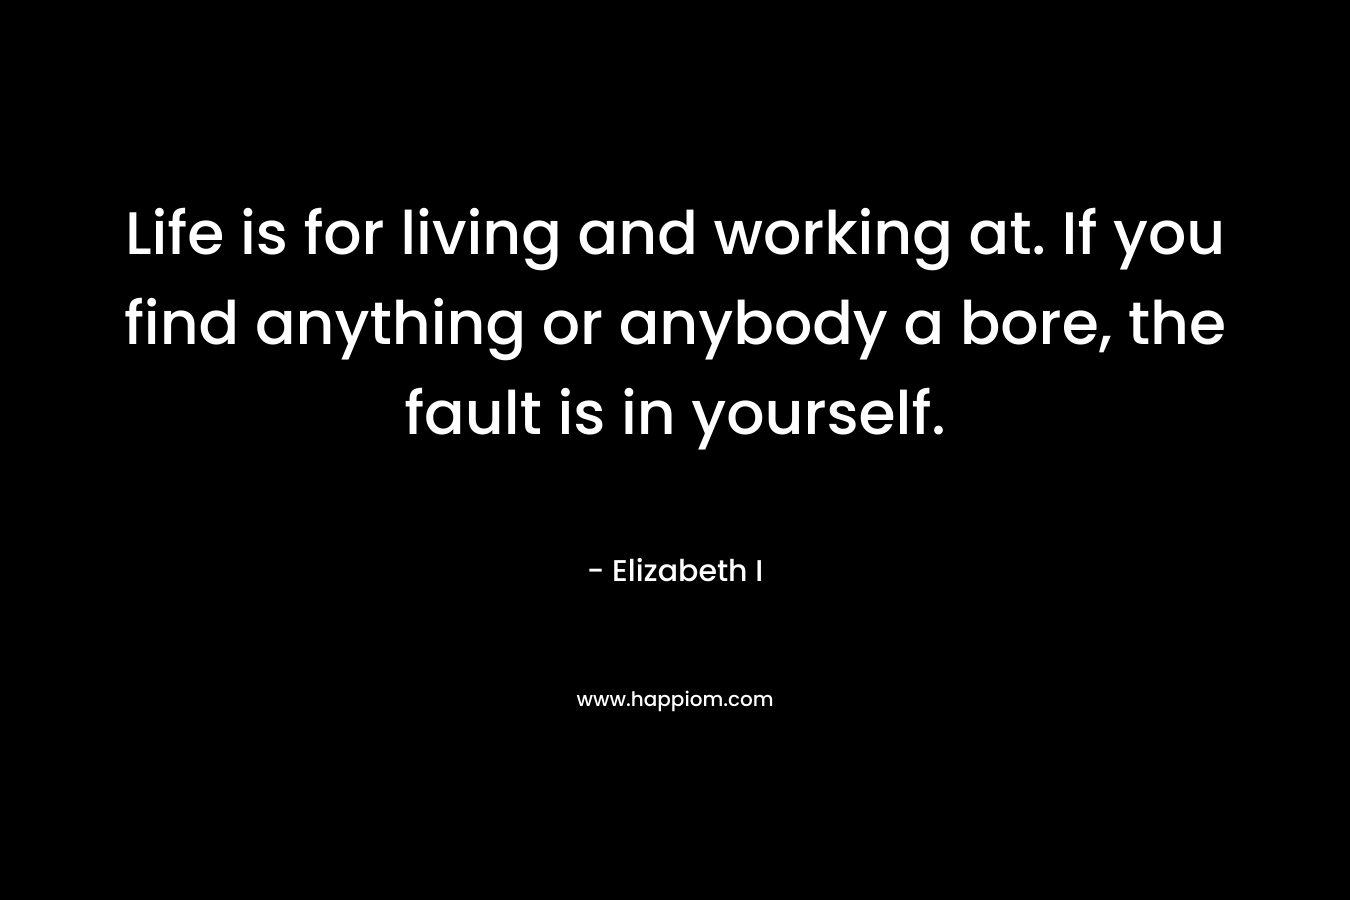 Life is for living and working at. If you find anything or anybody a bore, the fault is in yourself.